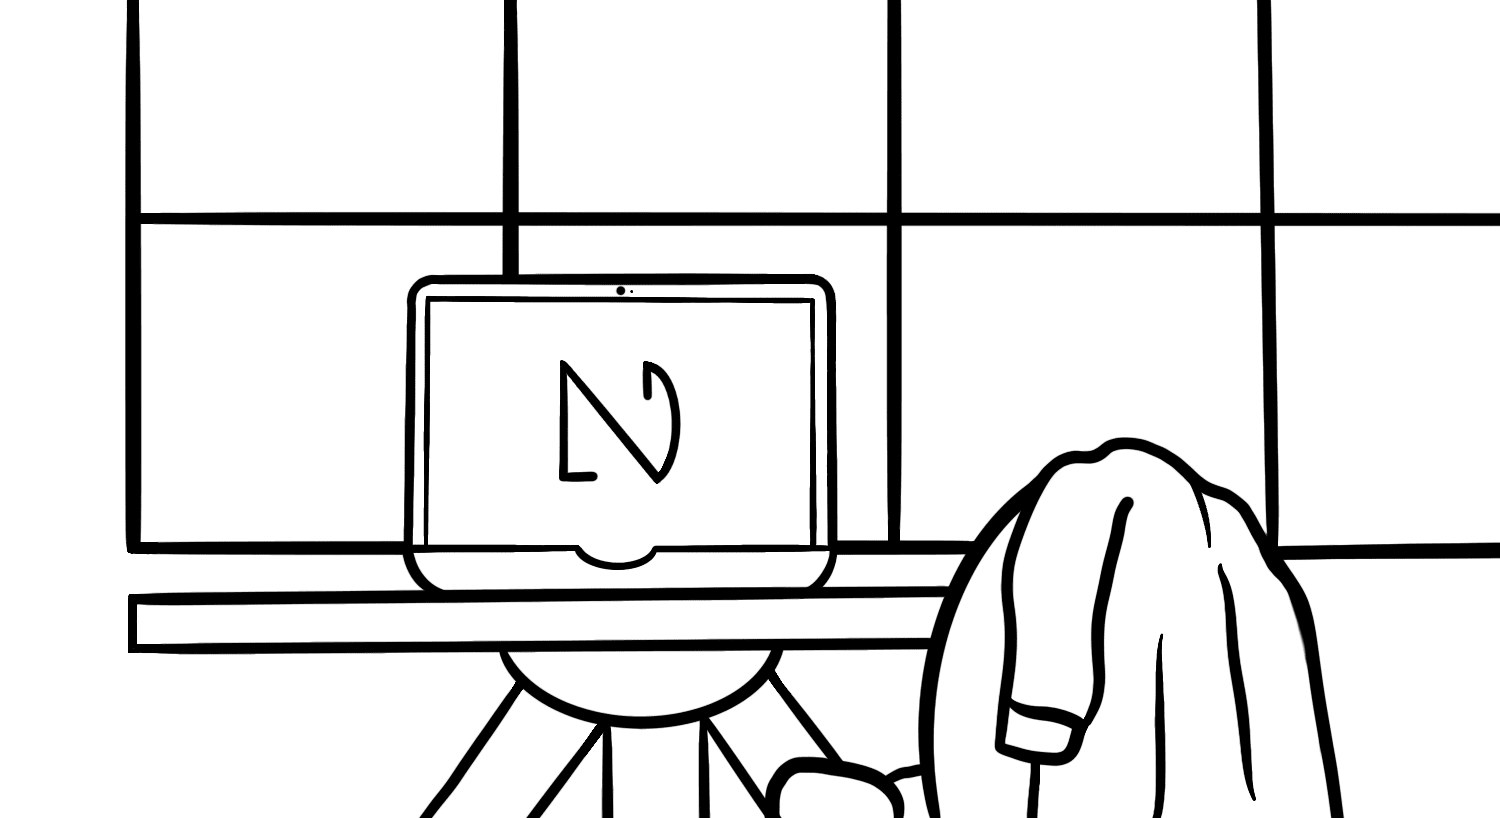 Illustration: A laptop sits on a table with a jacket-covered desk chair nearby, and a large multi-paned window in the background. The laptop screen displays the NVDA logo, which is an abstract blend of the letters that make up the acronym.